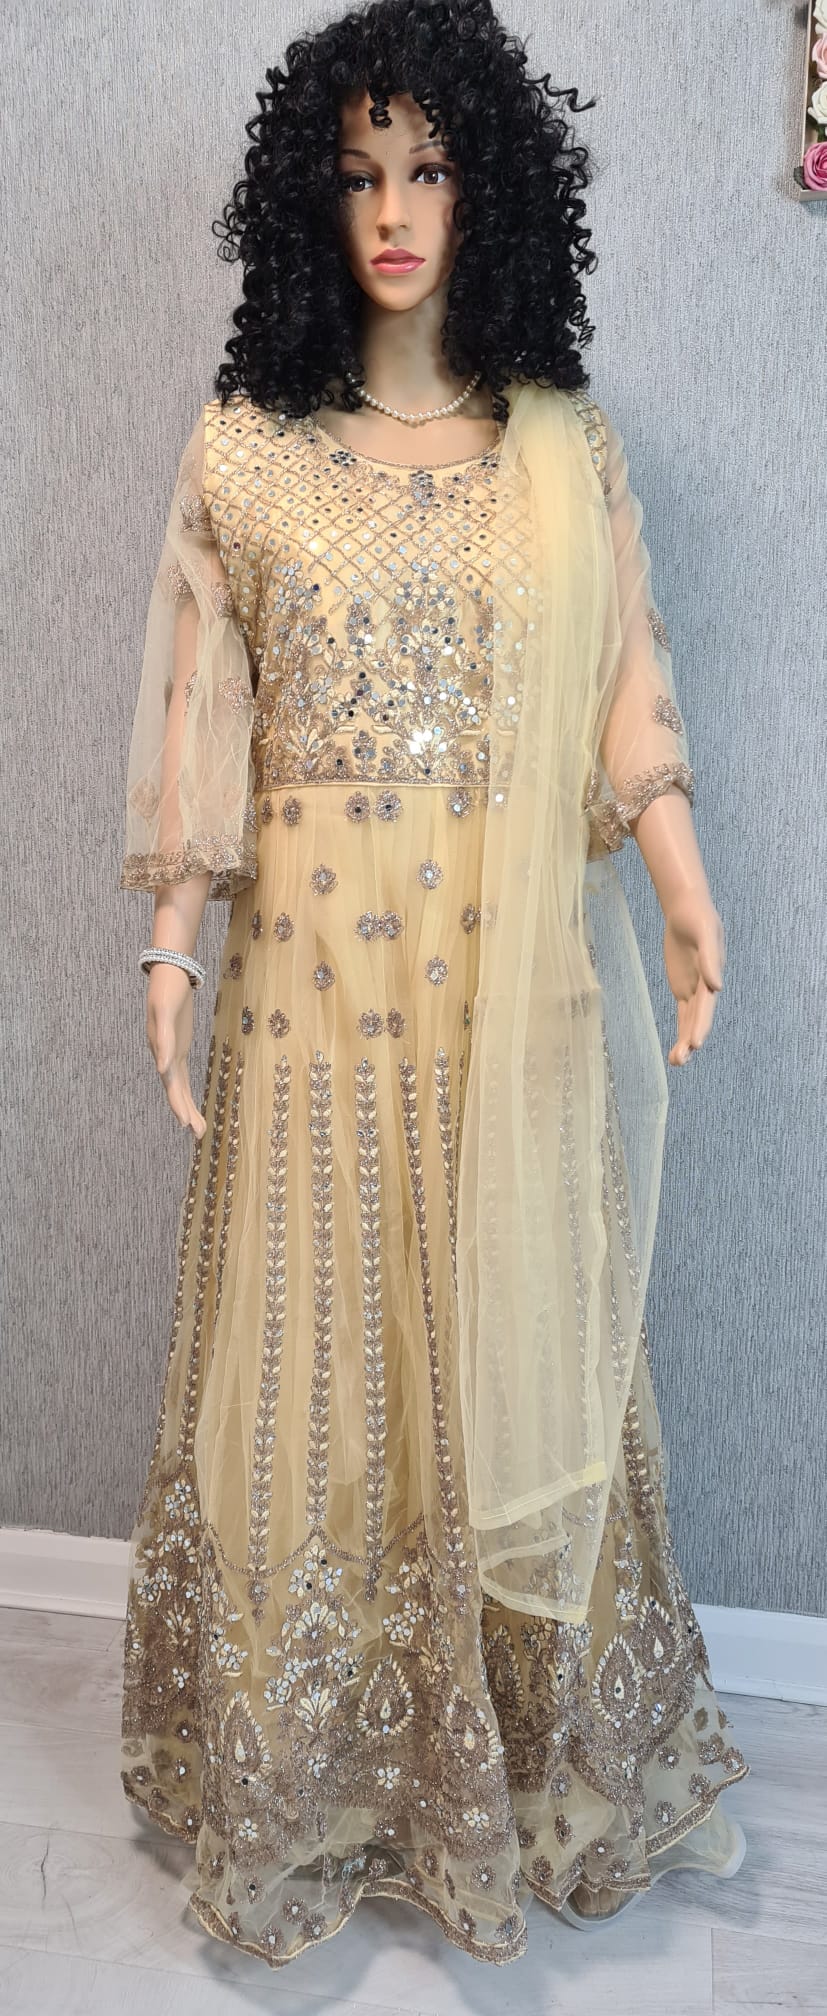 Fully embroidered gown